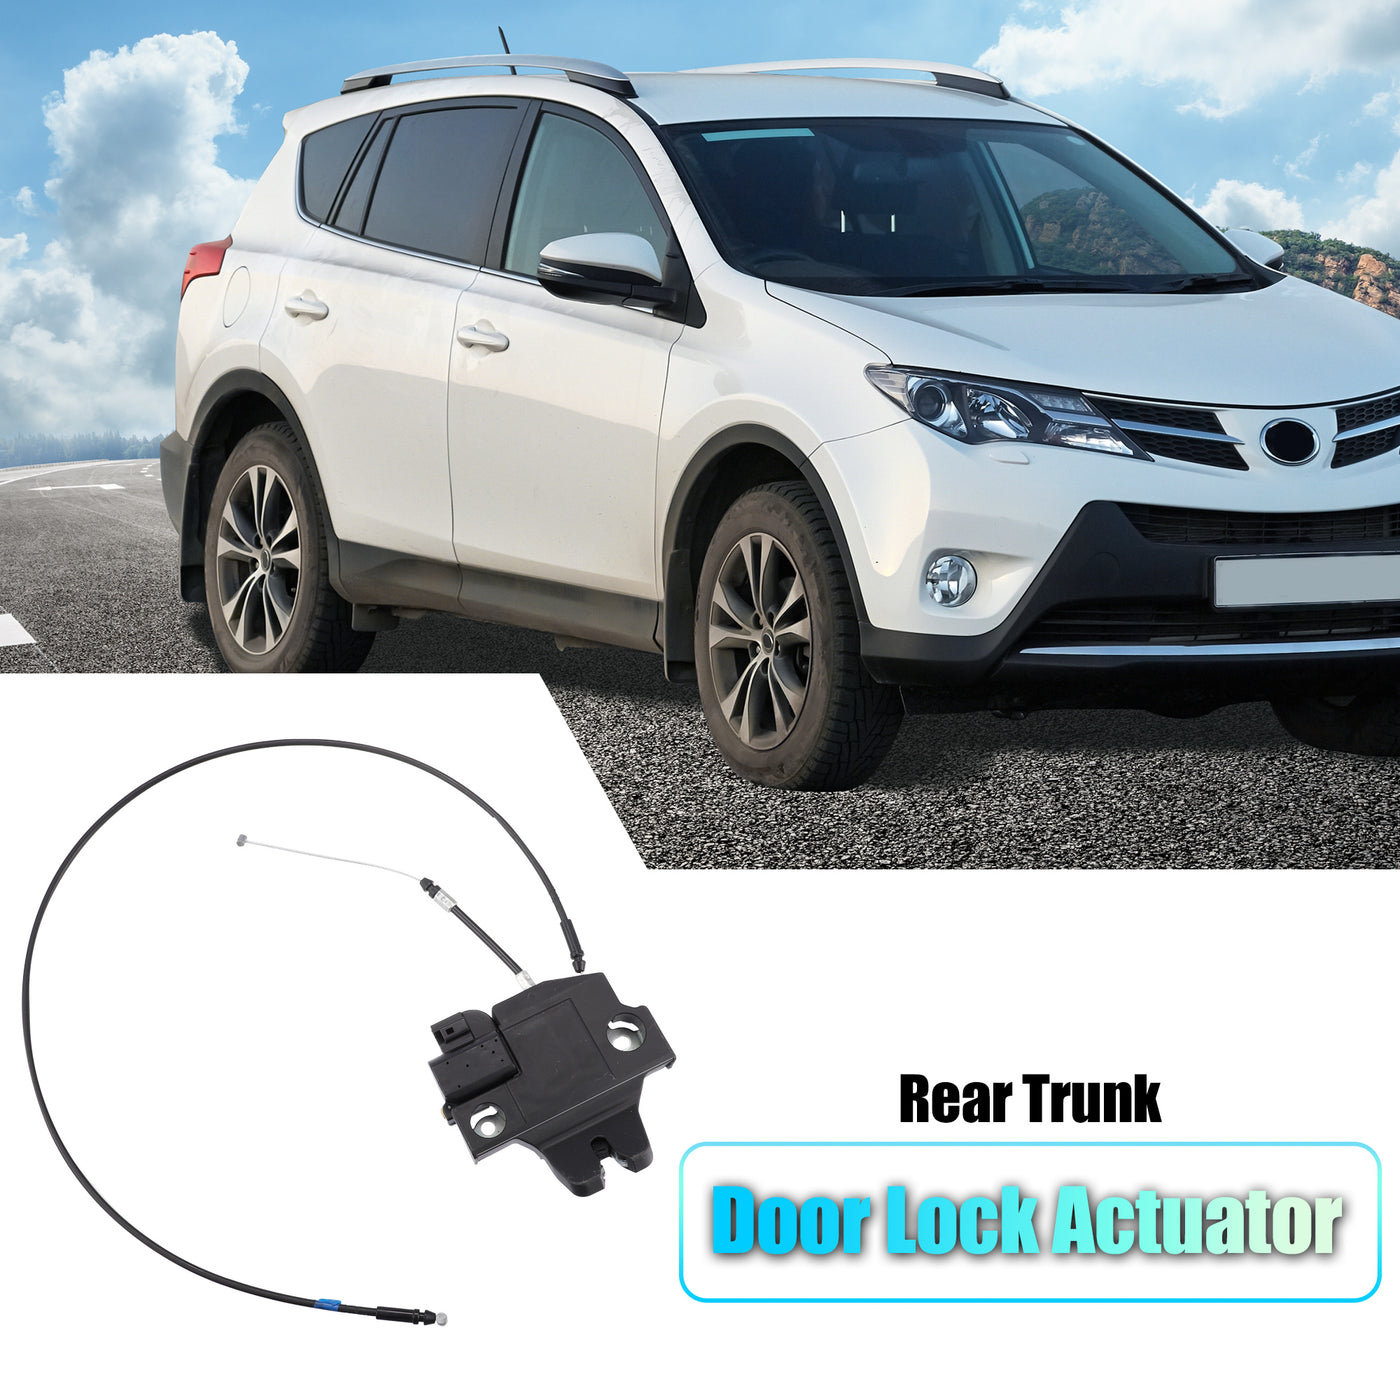 X AUTOHAUX Rear Trunk Latch Lock Actuator with Lock Cable 64600-53060 6460053060 for Lexus IS F 2008-2014 for IS250 IS350 2006-2013 Tailgate Lock